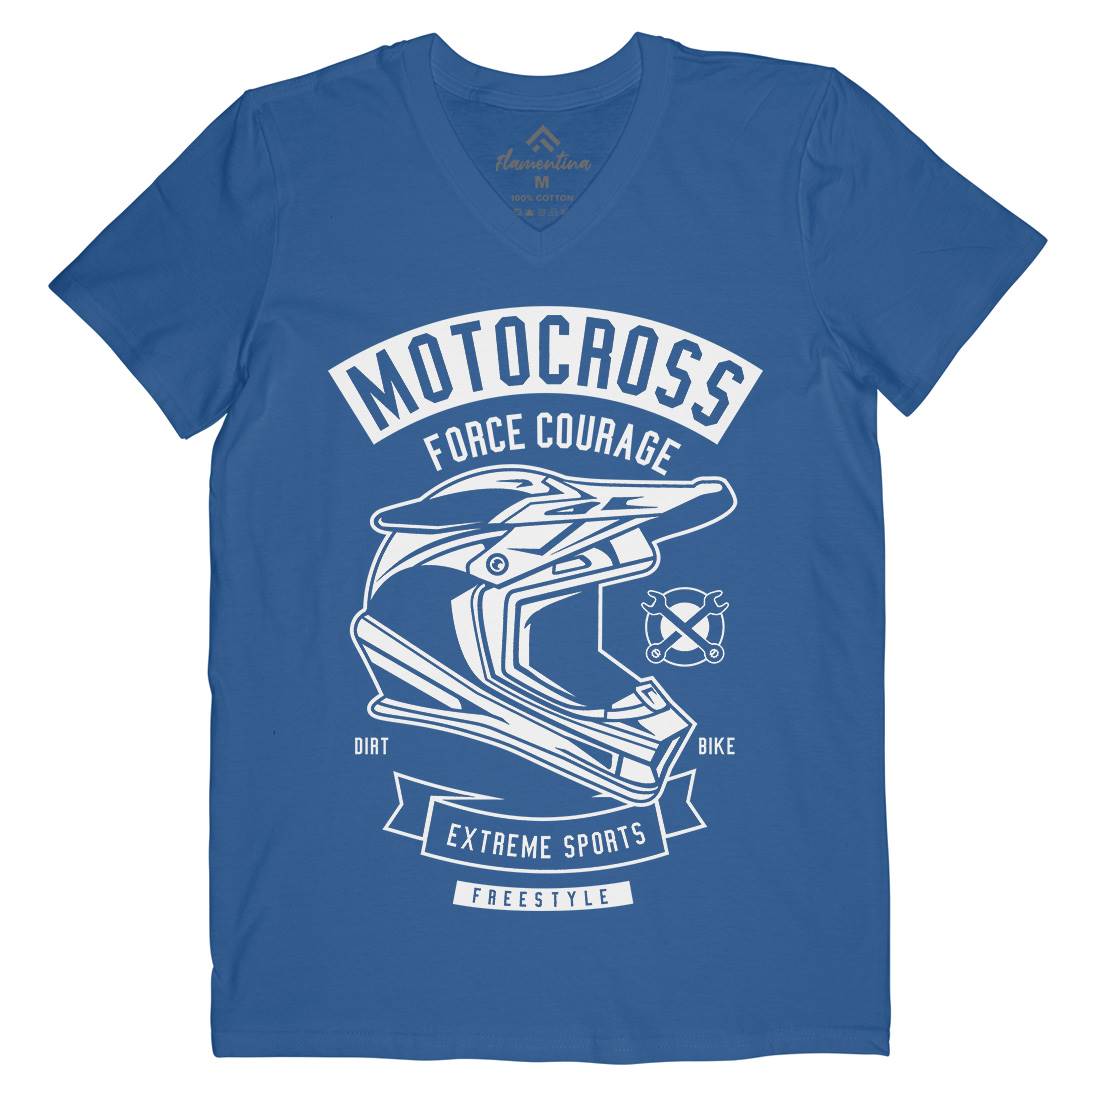 Motocross Force Courage Mens V-Neck T-Shirt Motorcycles B576